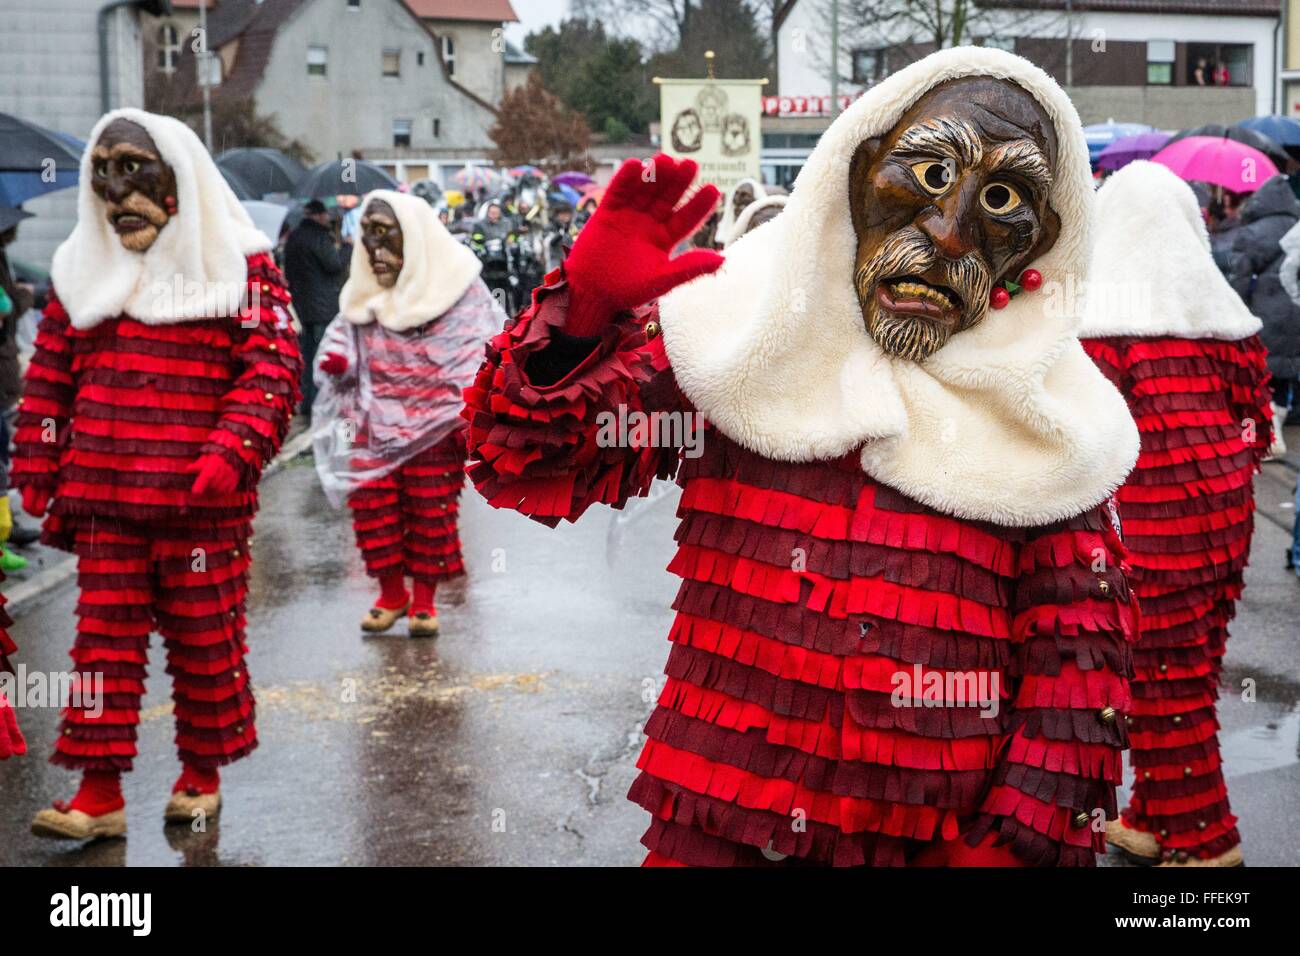 Swabian-Aleman carnival with witches, devils & more, Althuette, Germany, Jan. 31, 2016. Stock Photo